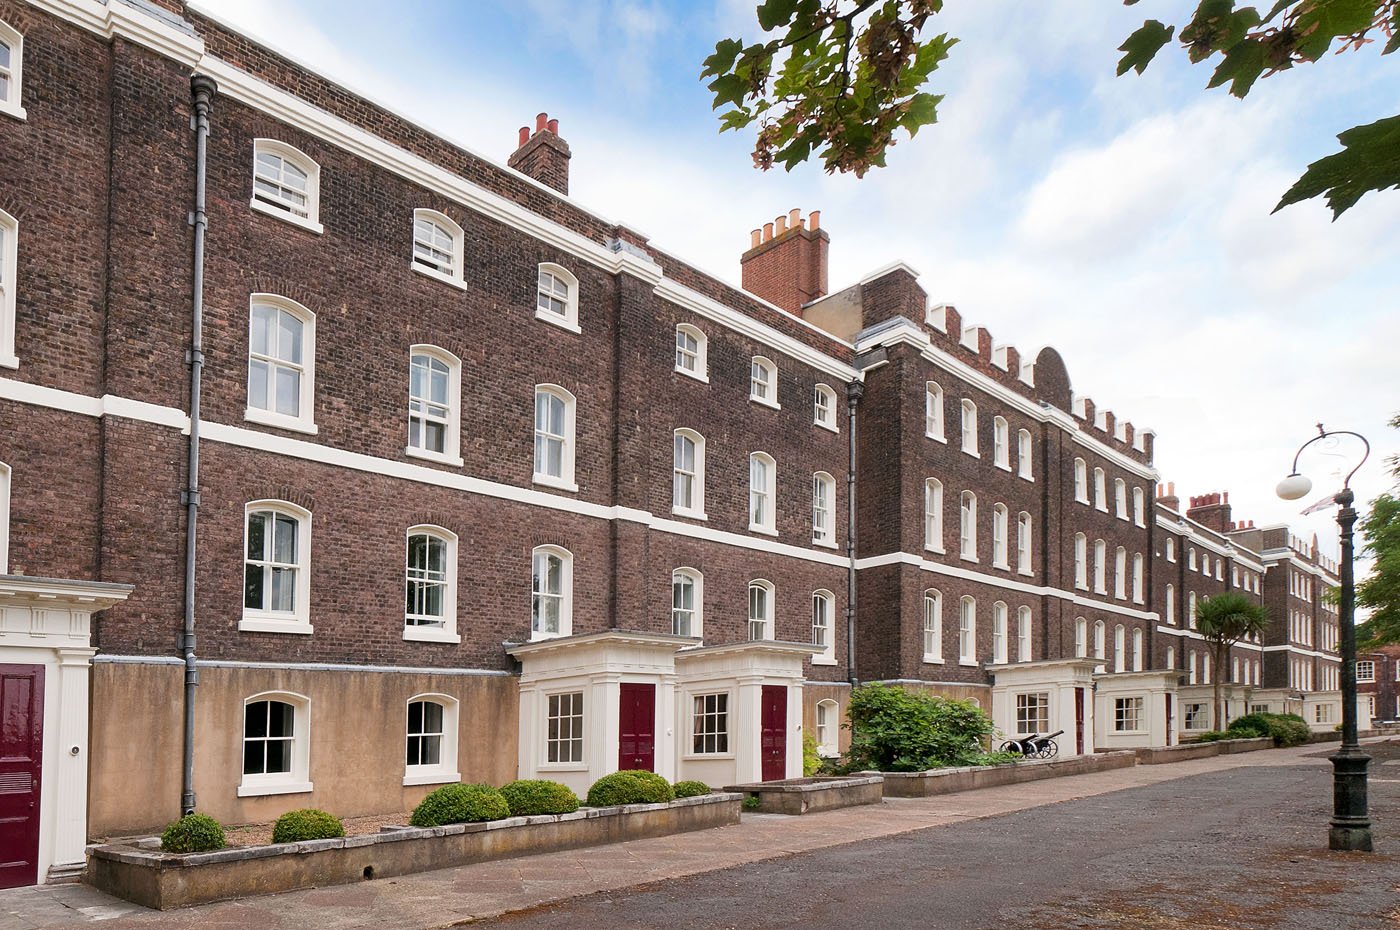 7 Bedroom Terraced House For Sale in Stunning Grade 1 Listed Residence In The Historical Dockyard